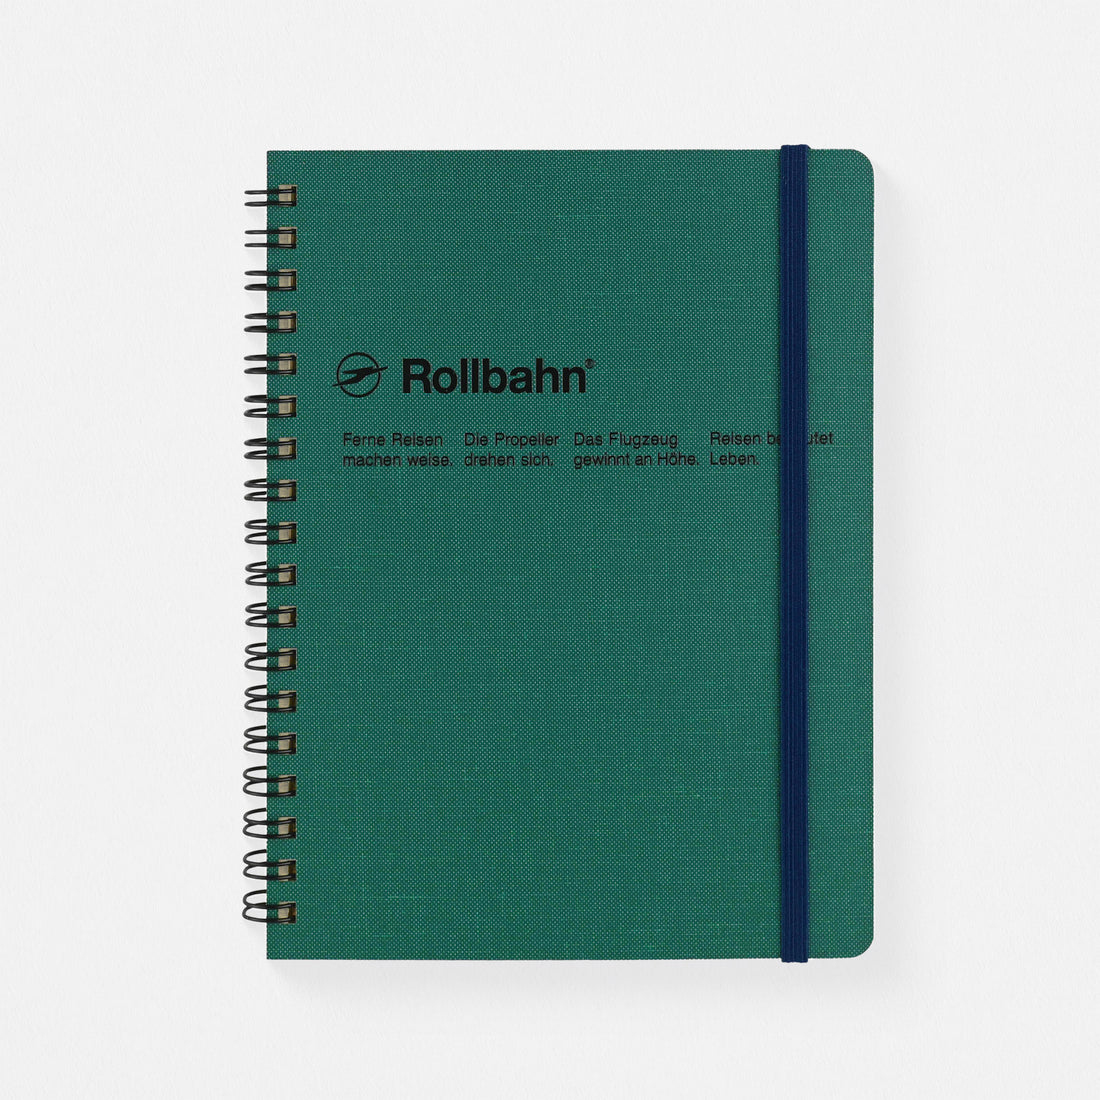 Delfonics Rollbahn Cap-Martin Textured Cover Notebook Large Or A5 | Greige, Green, Dark Blue Or Blue Green / Large (5.5 x 7")